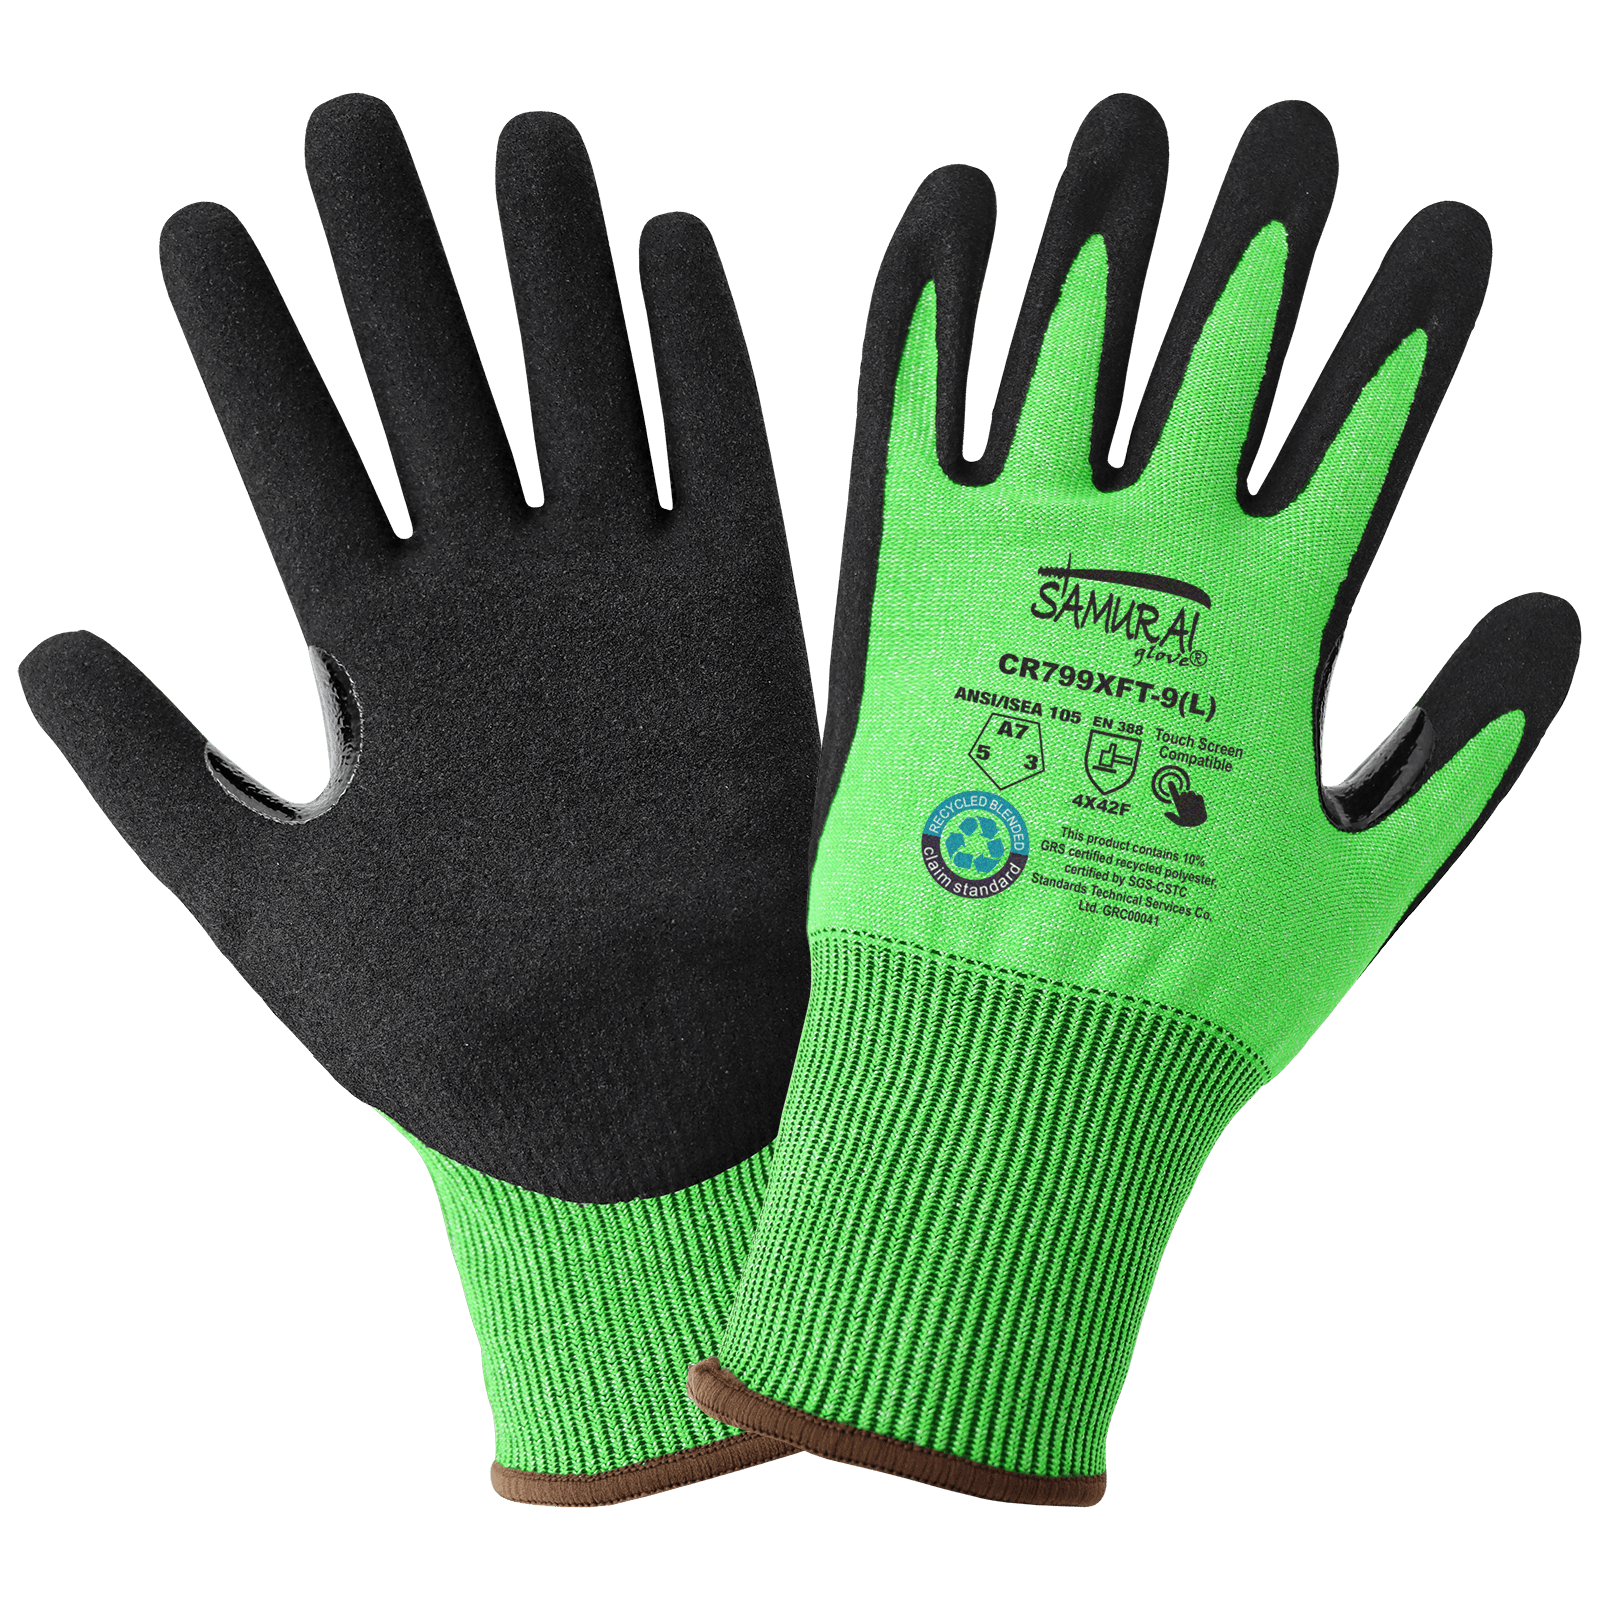 Samurai Glove® Hi-Viz Nitrile Coated rPET Recycled Cut Resistant Gloves with Touch Screen Fingers - Gloves